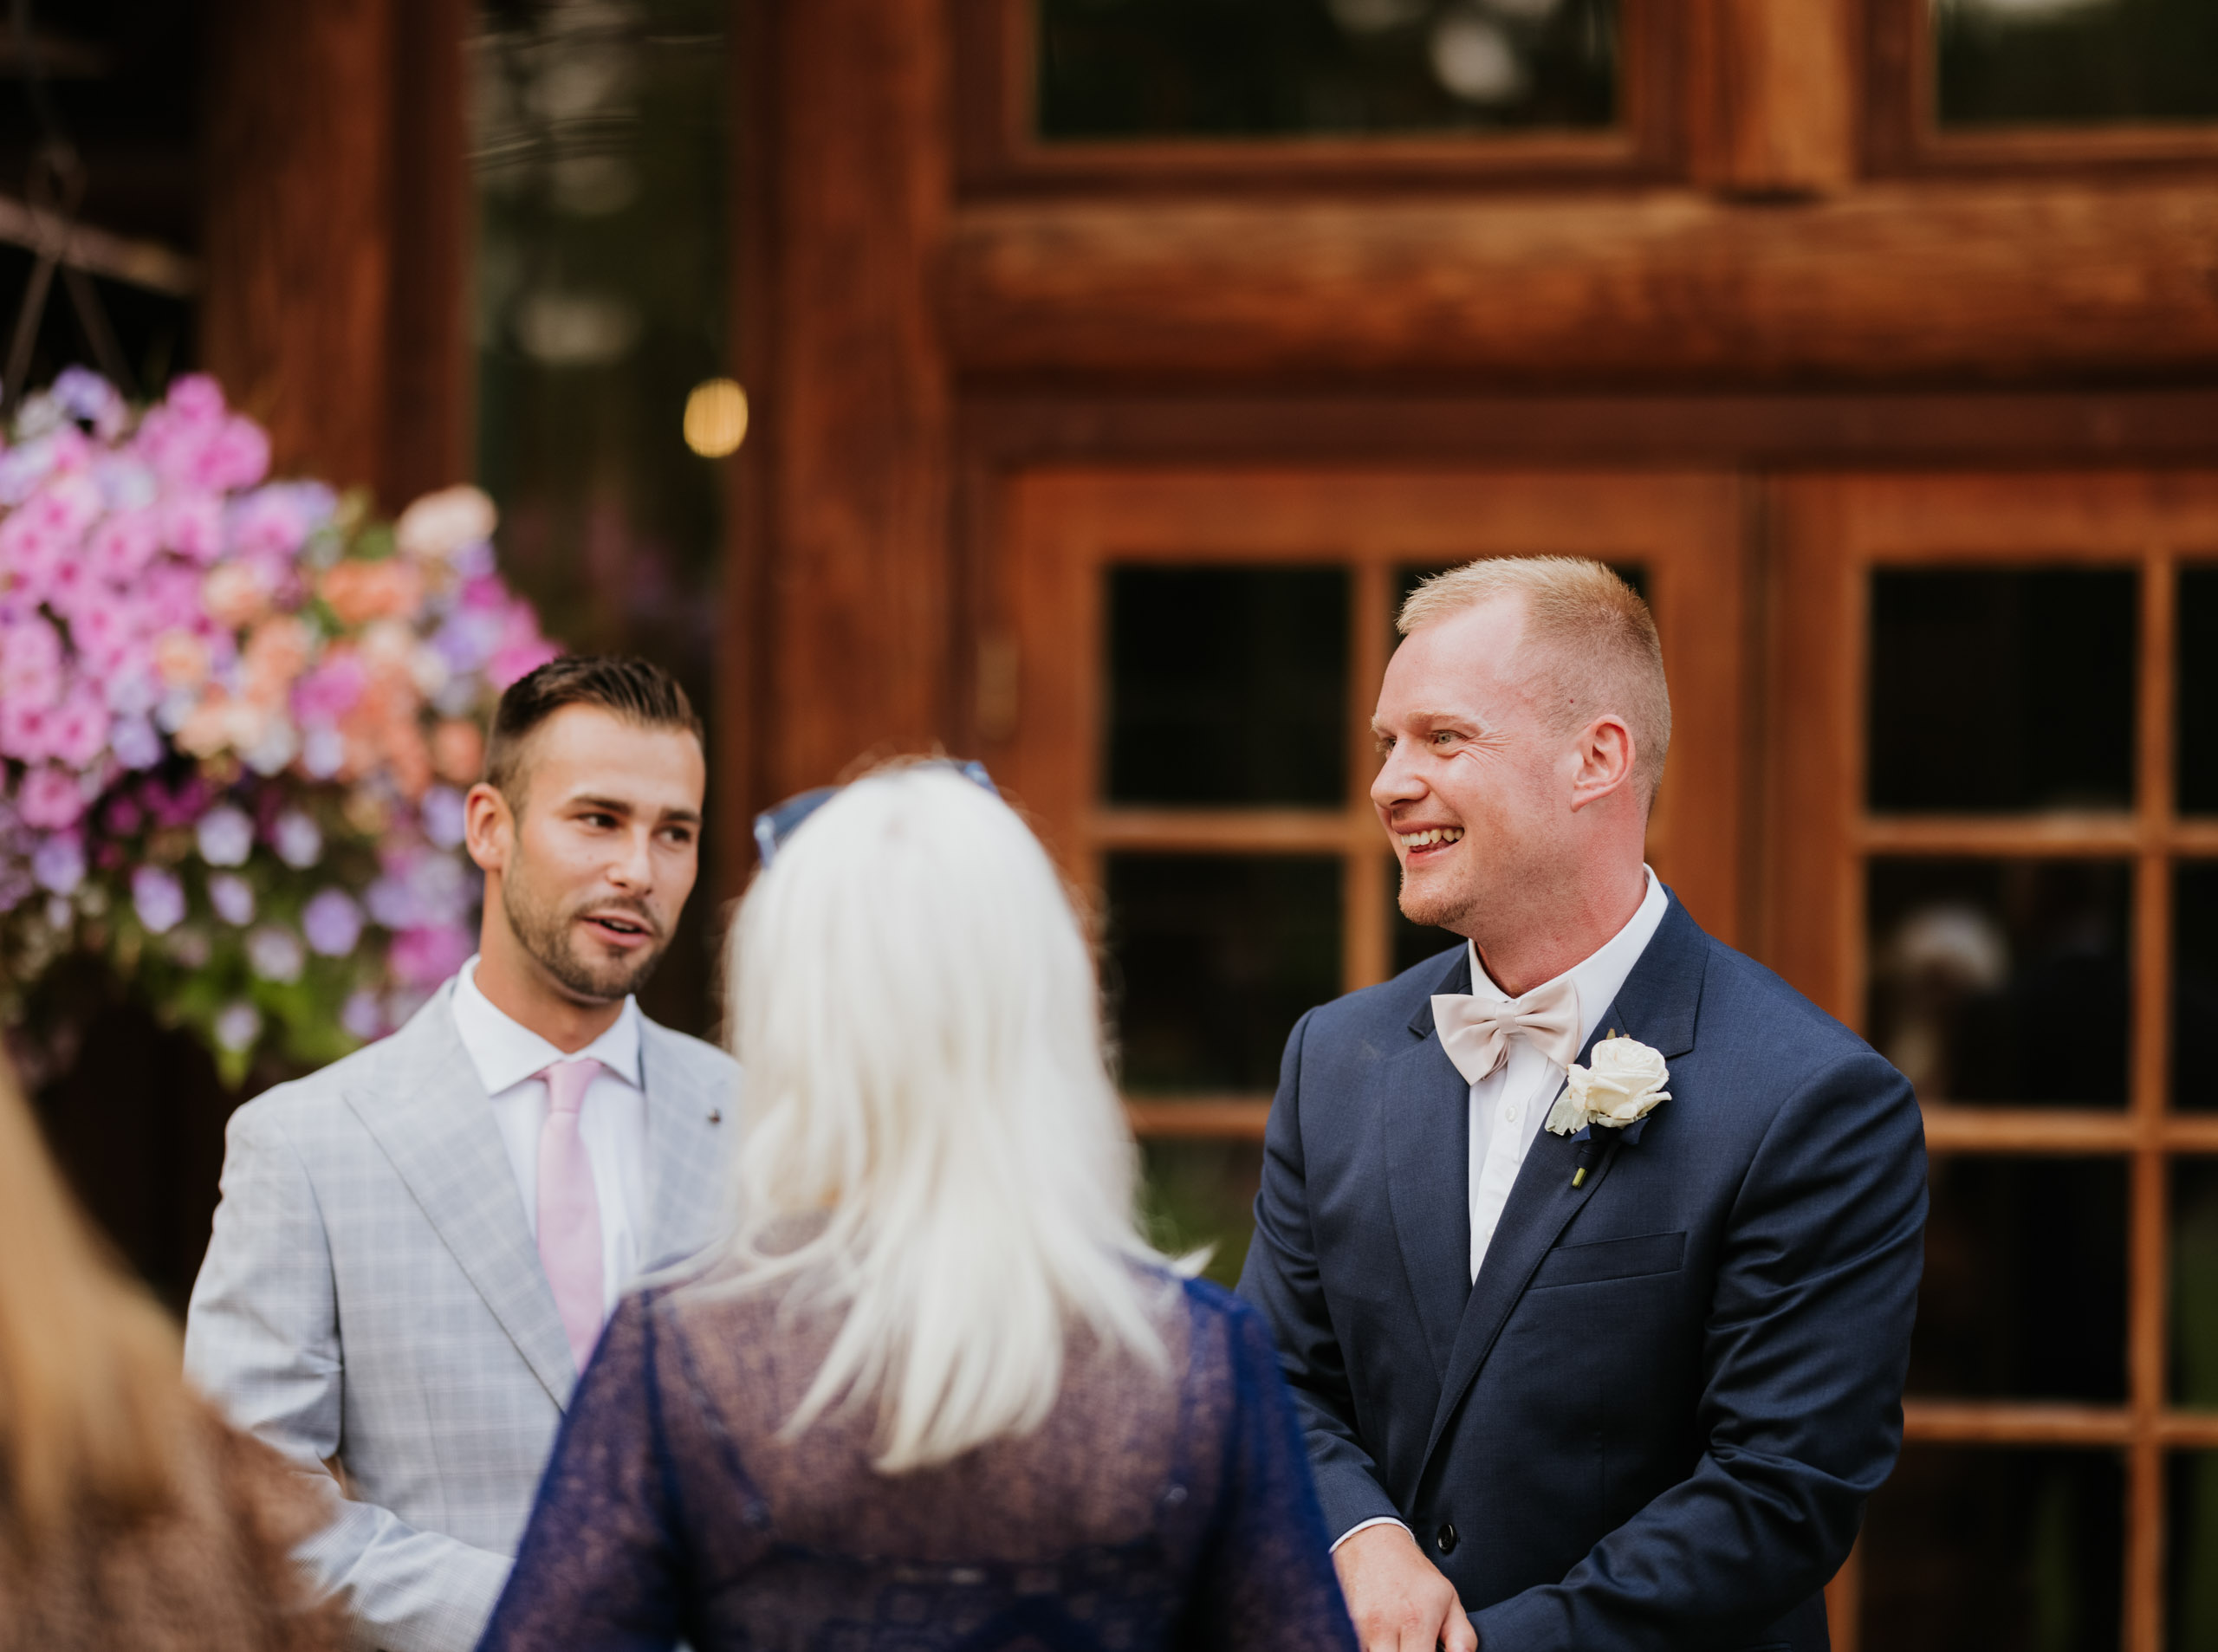 https://breannapluskevin.com/wp-content/uploads/photo-gallery/imported_from_media_libray/kiana-lodge-wedding-bm-breanna-plus-kevin-44.jpg